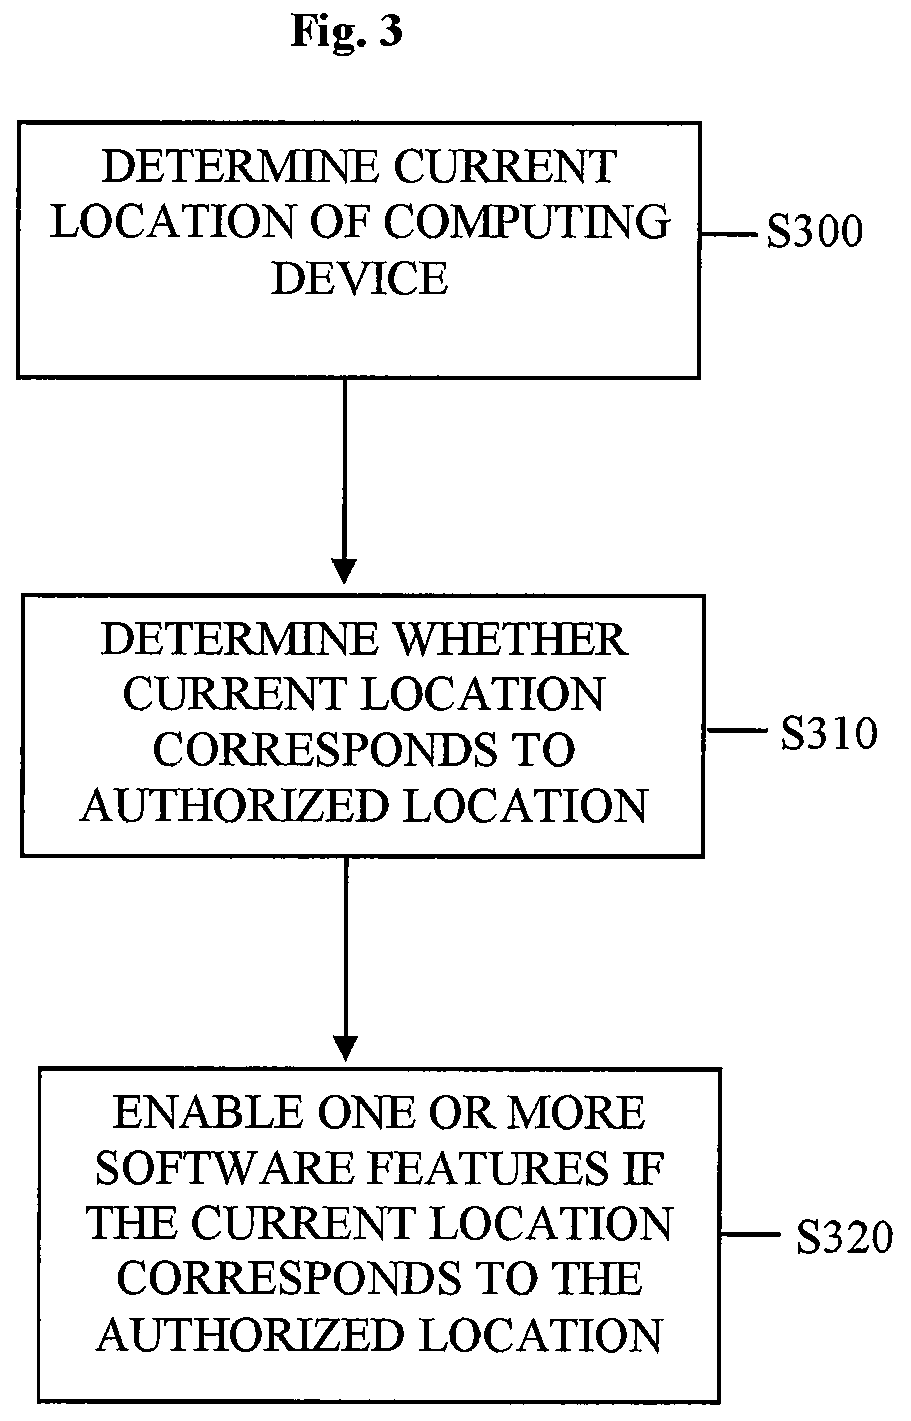 Location-based feature enablement for mobile terminals